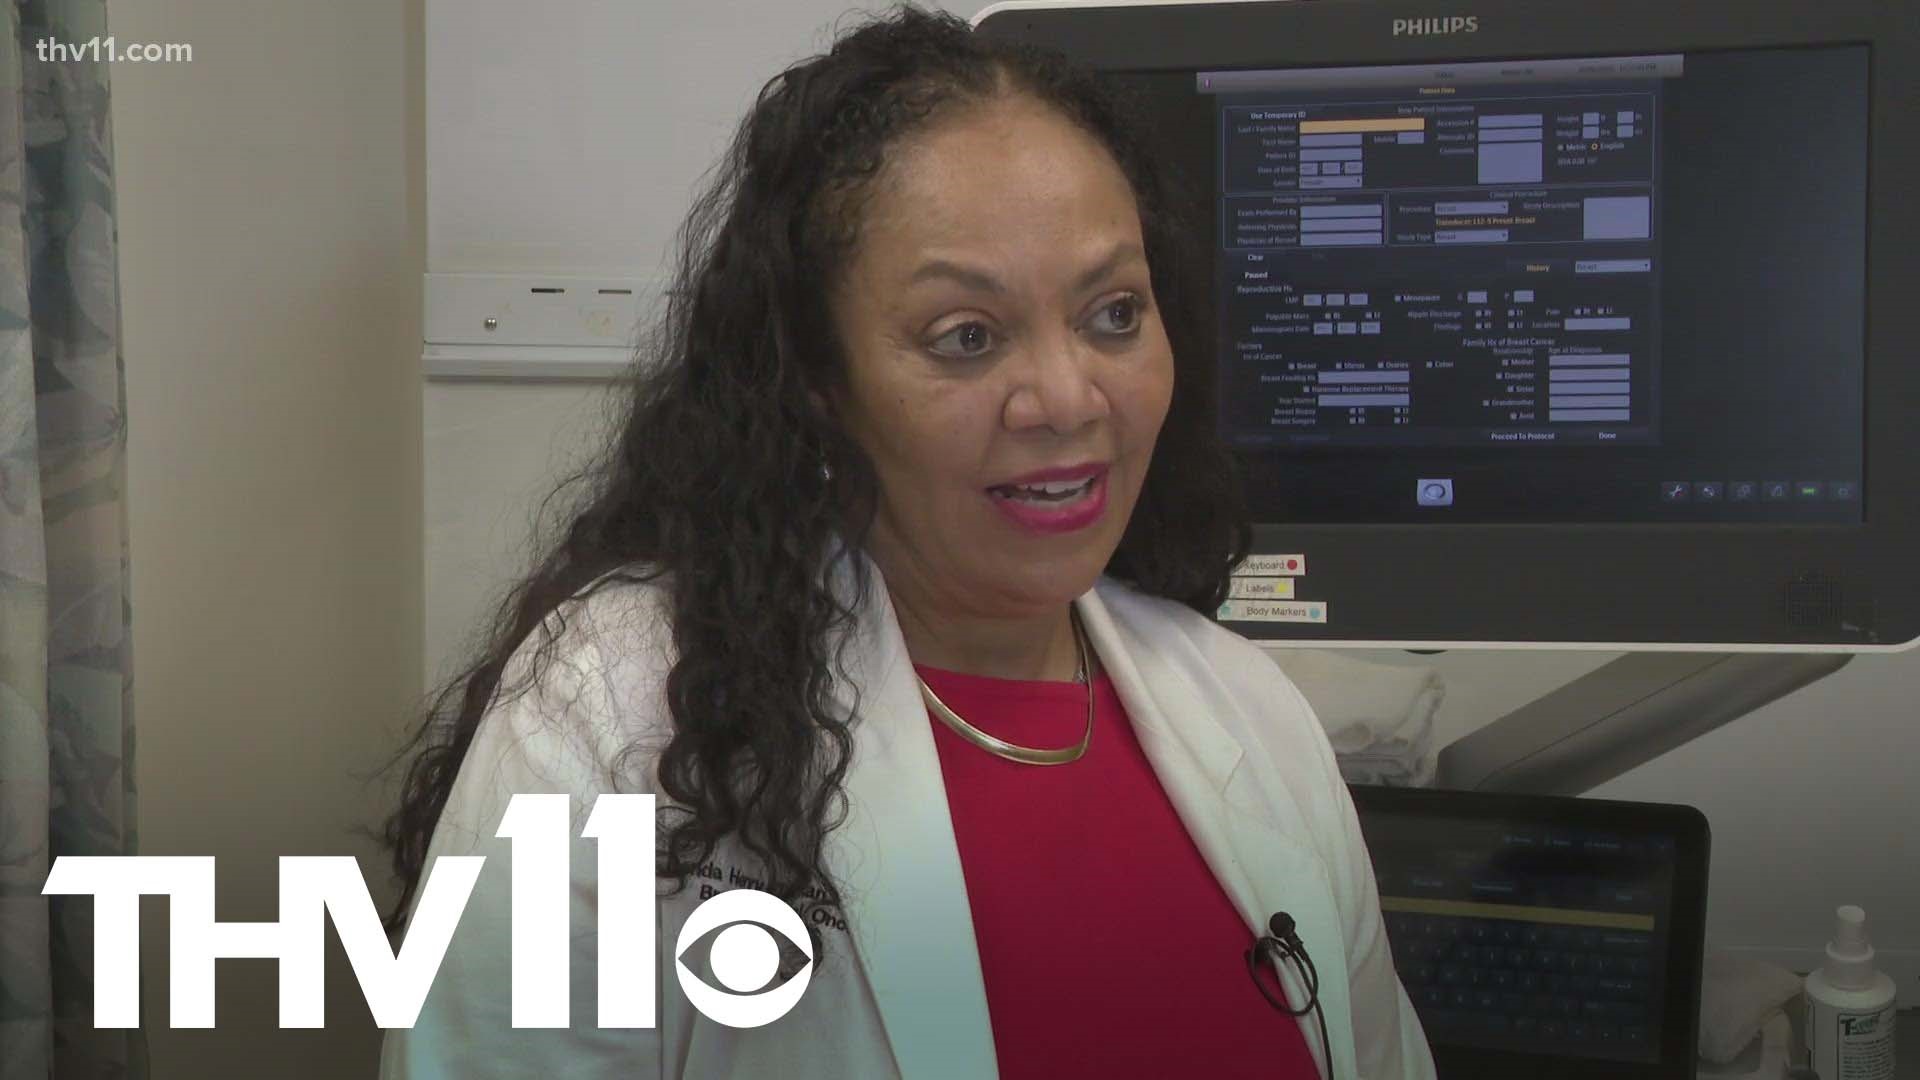 Dr. Ronda Henry-Tillman is a professor in the surgery department at UAMS  and Chief of Breast Oncology at the Winthrop P. Rockefeller Cancer Institute.